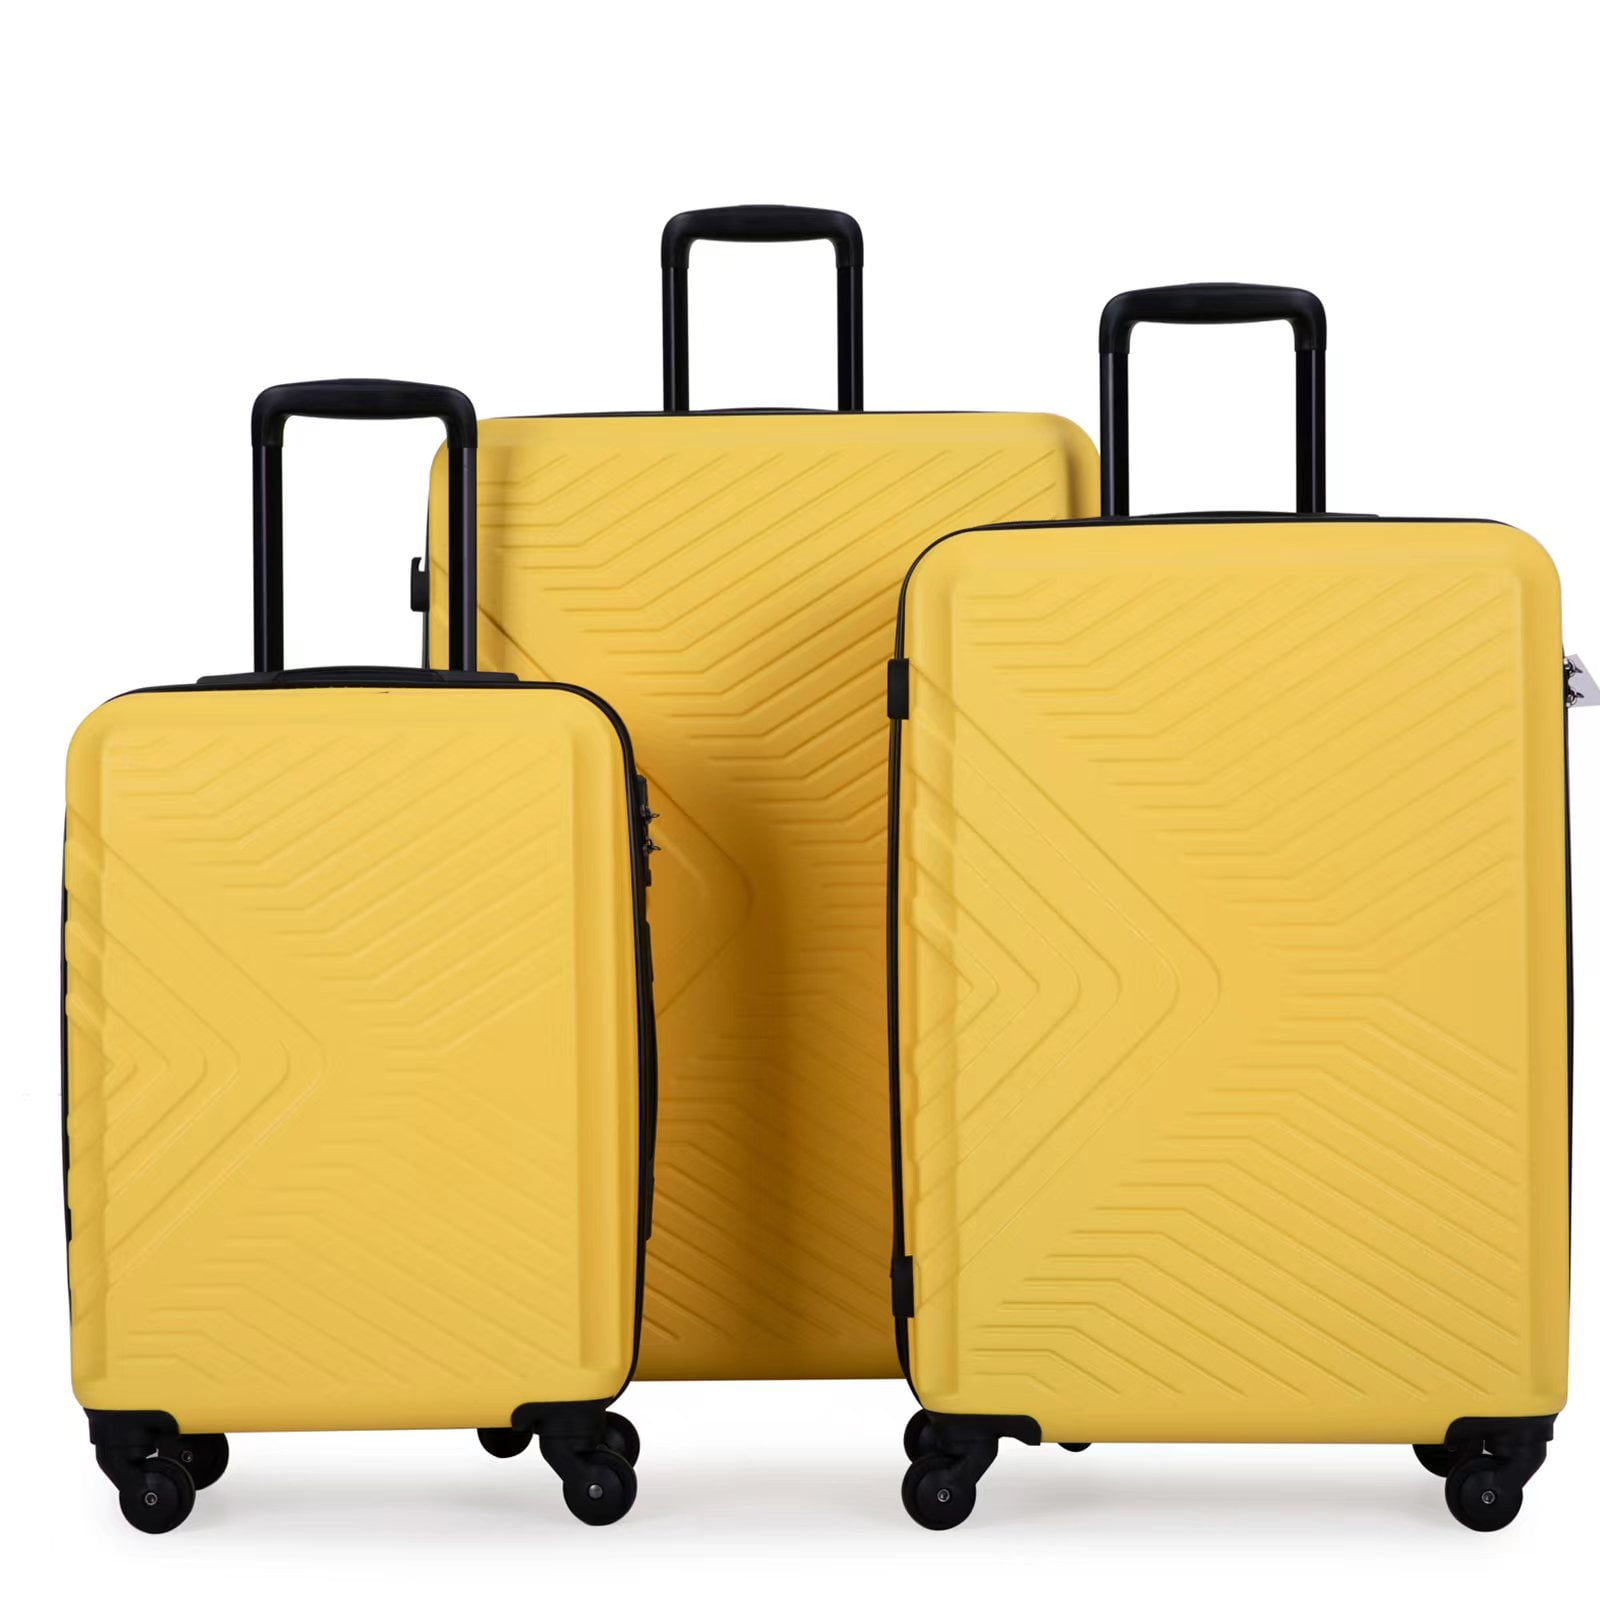 Travelhouse 3 Piece Luggage Set Hardshell Lightweight Suitcase with TSA  Lock Spinner Wheels 20in24in28in.(Yellow)